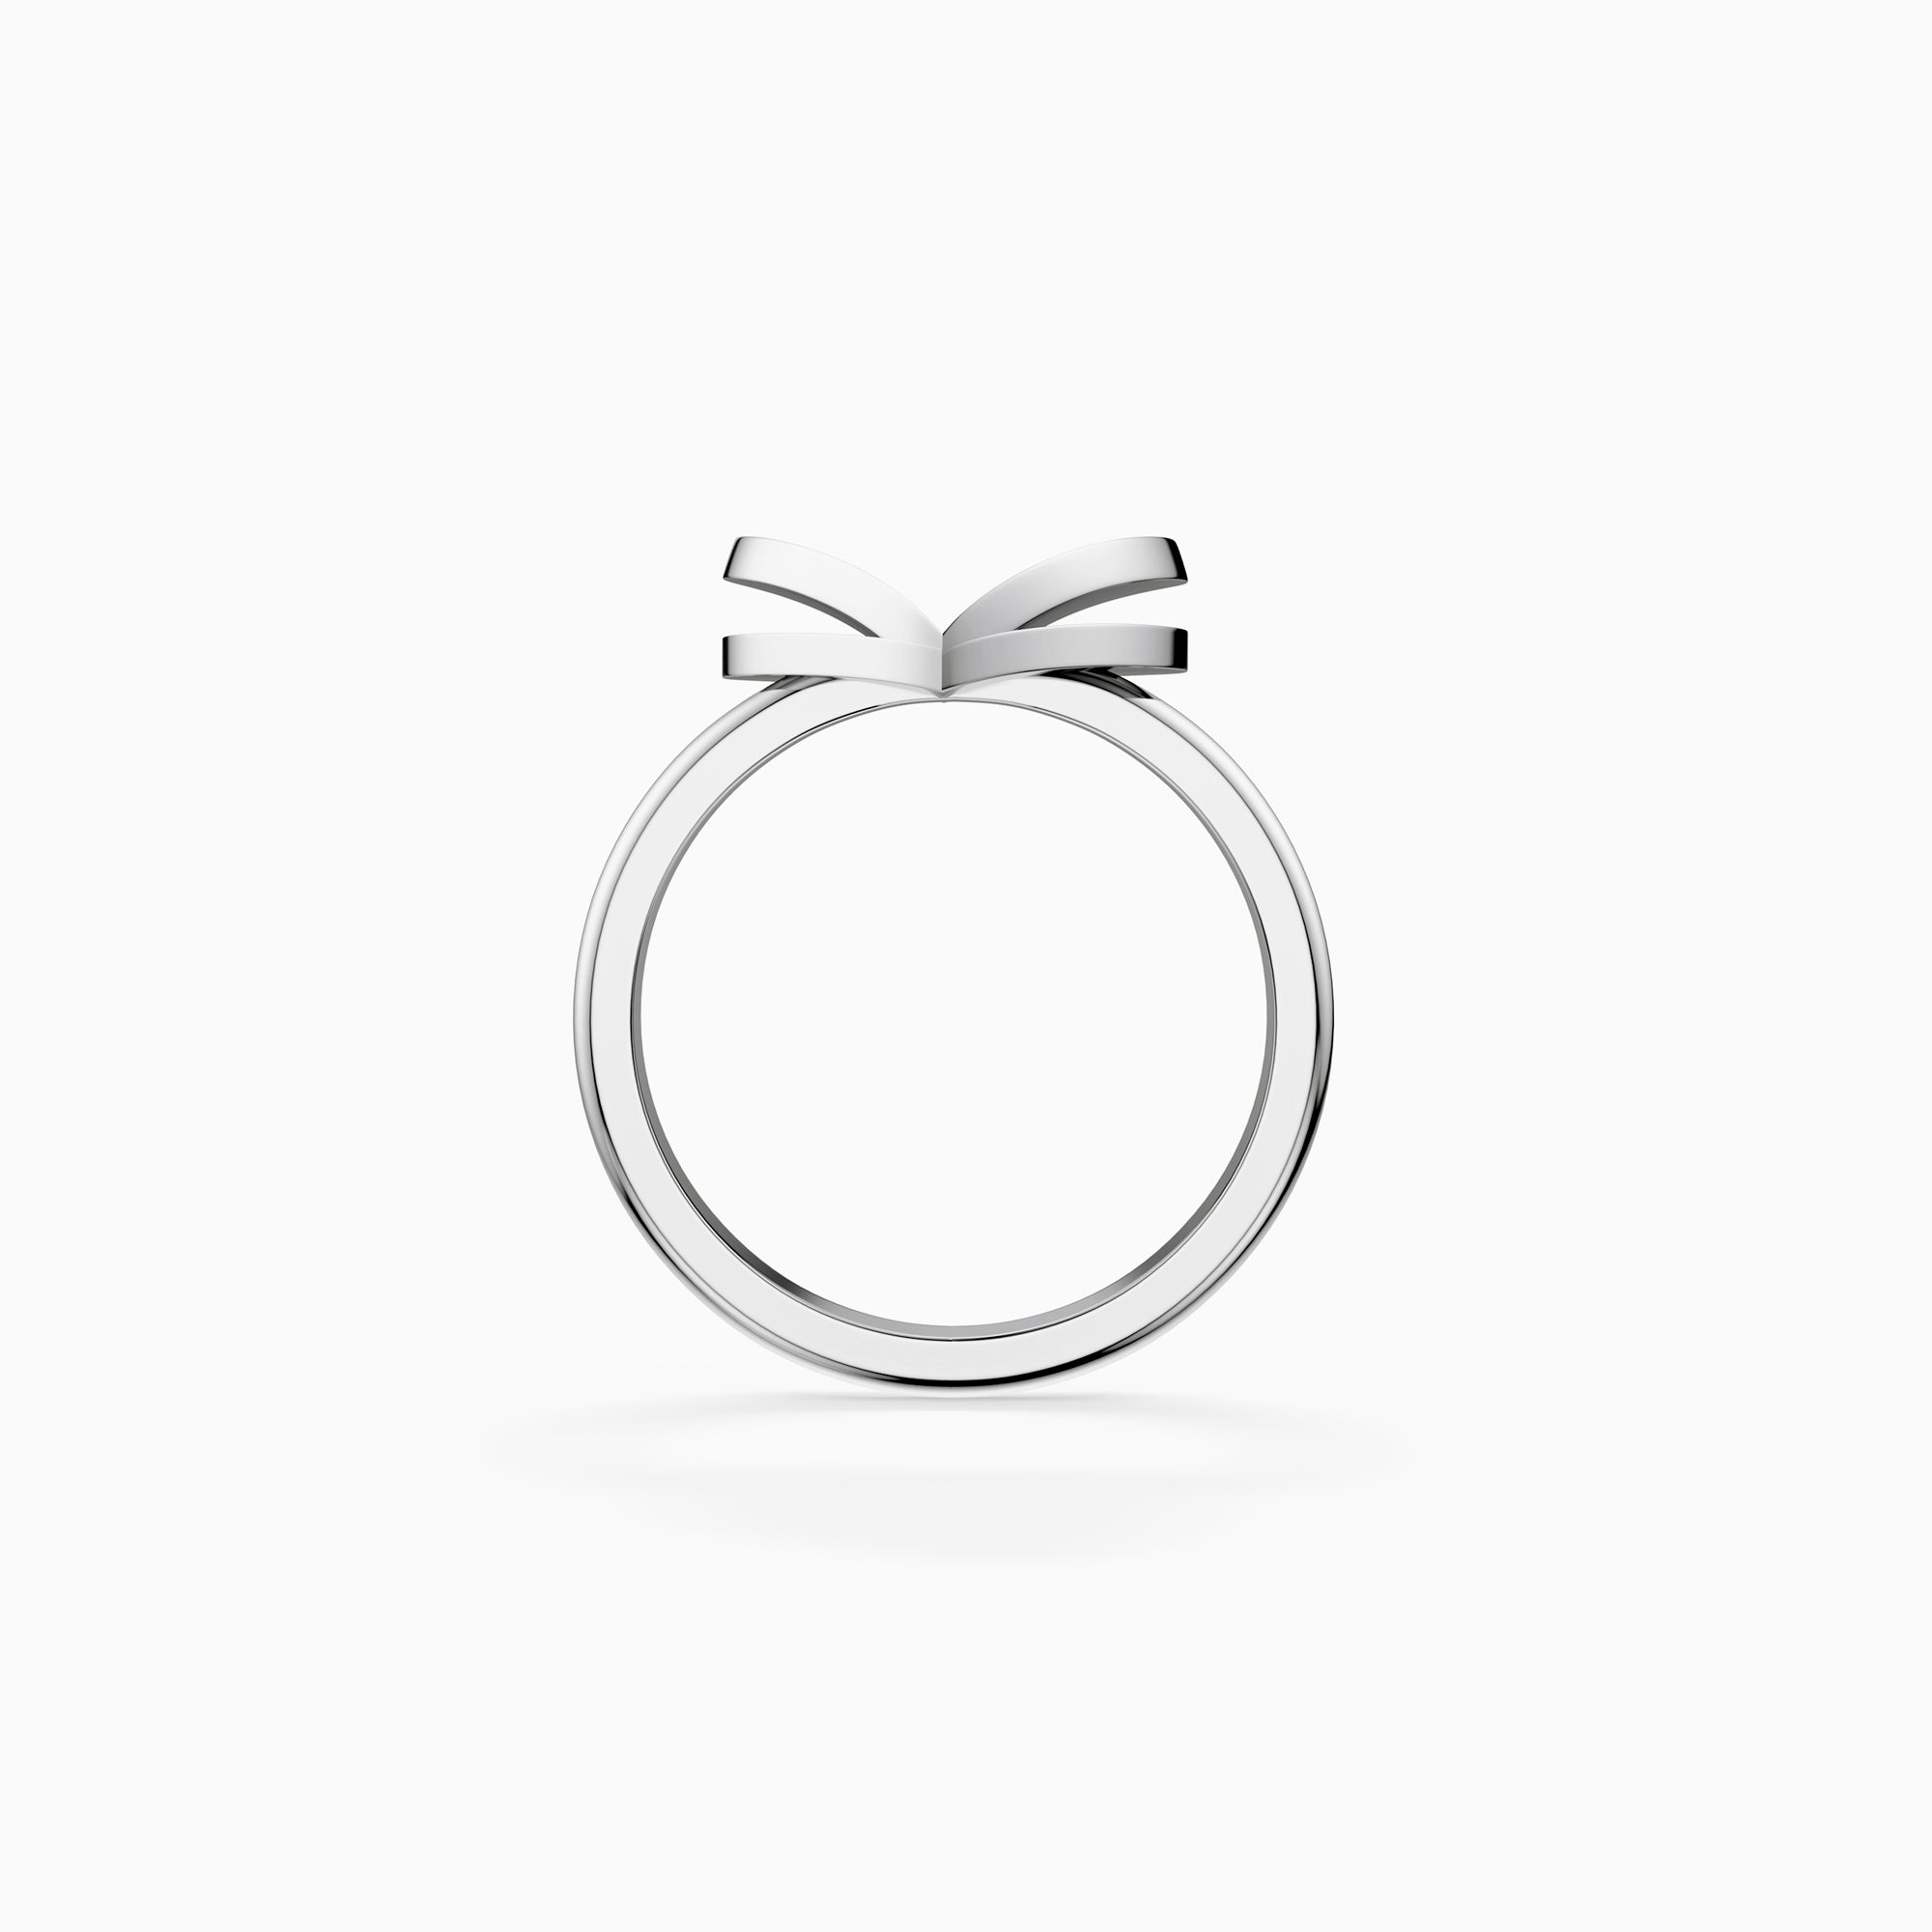 Chapters of Love Engraved Statement Ring